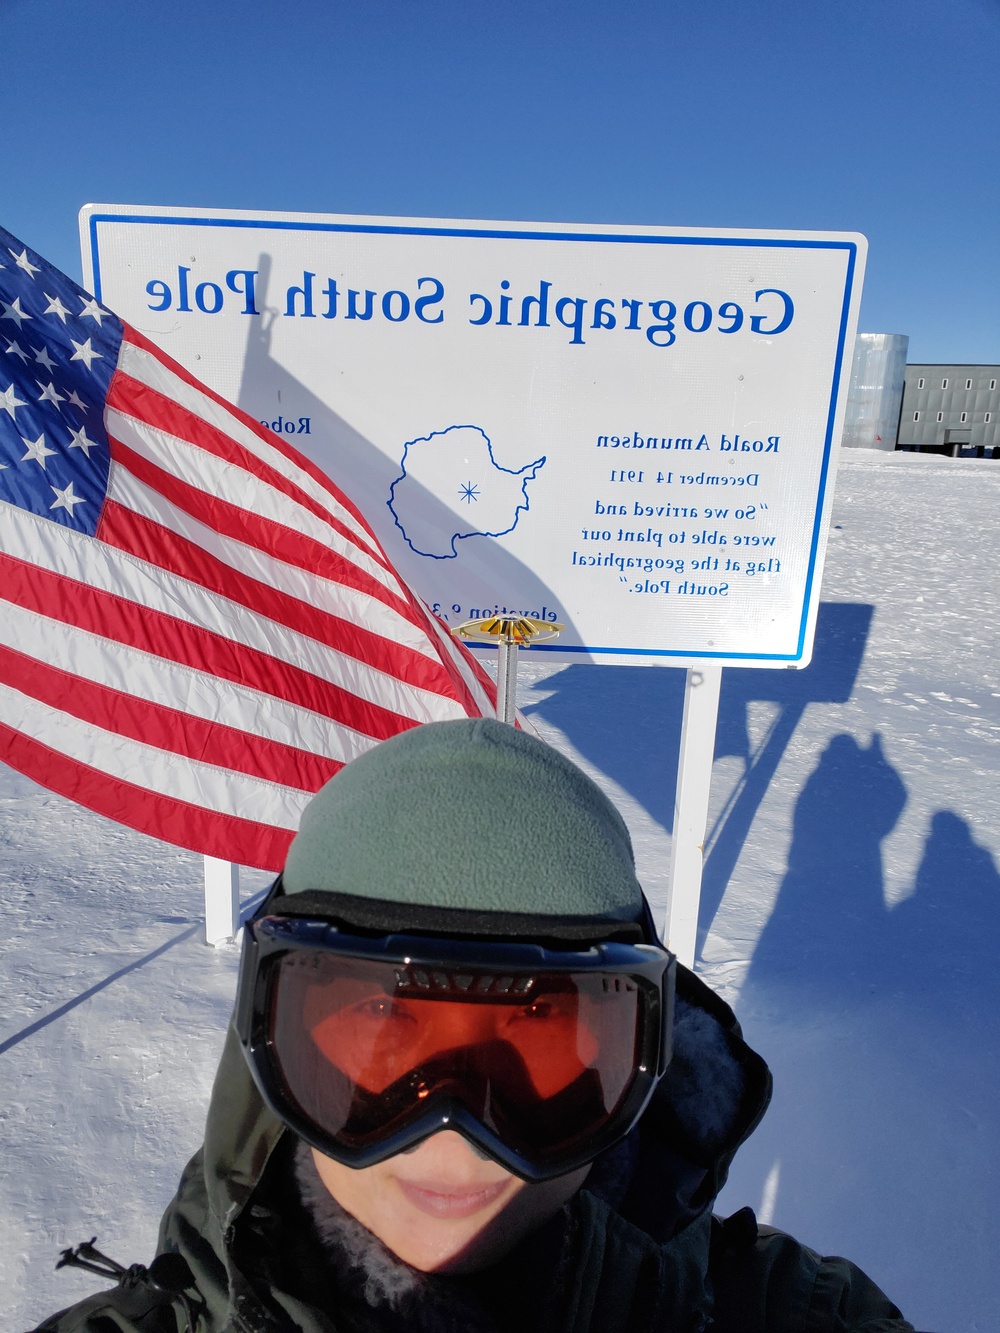 From Vermont to Antartica (and Back)